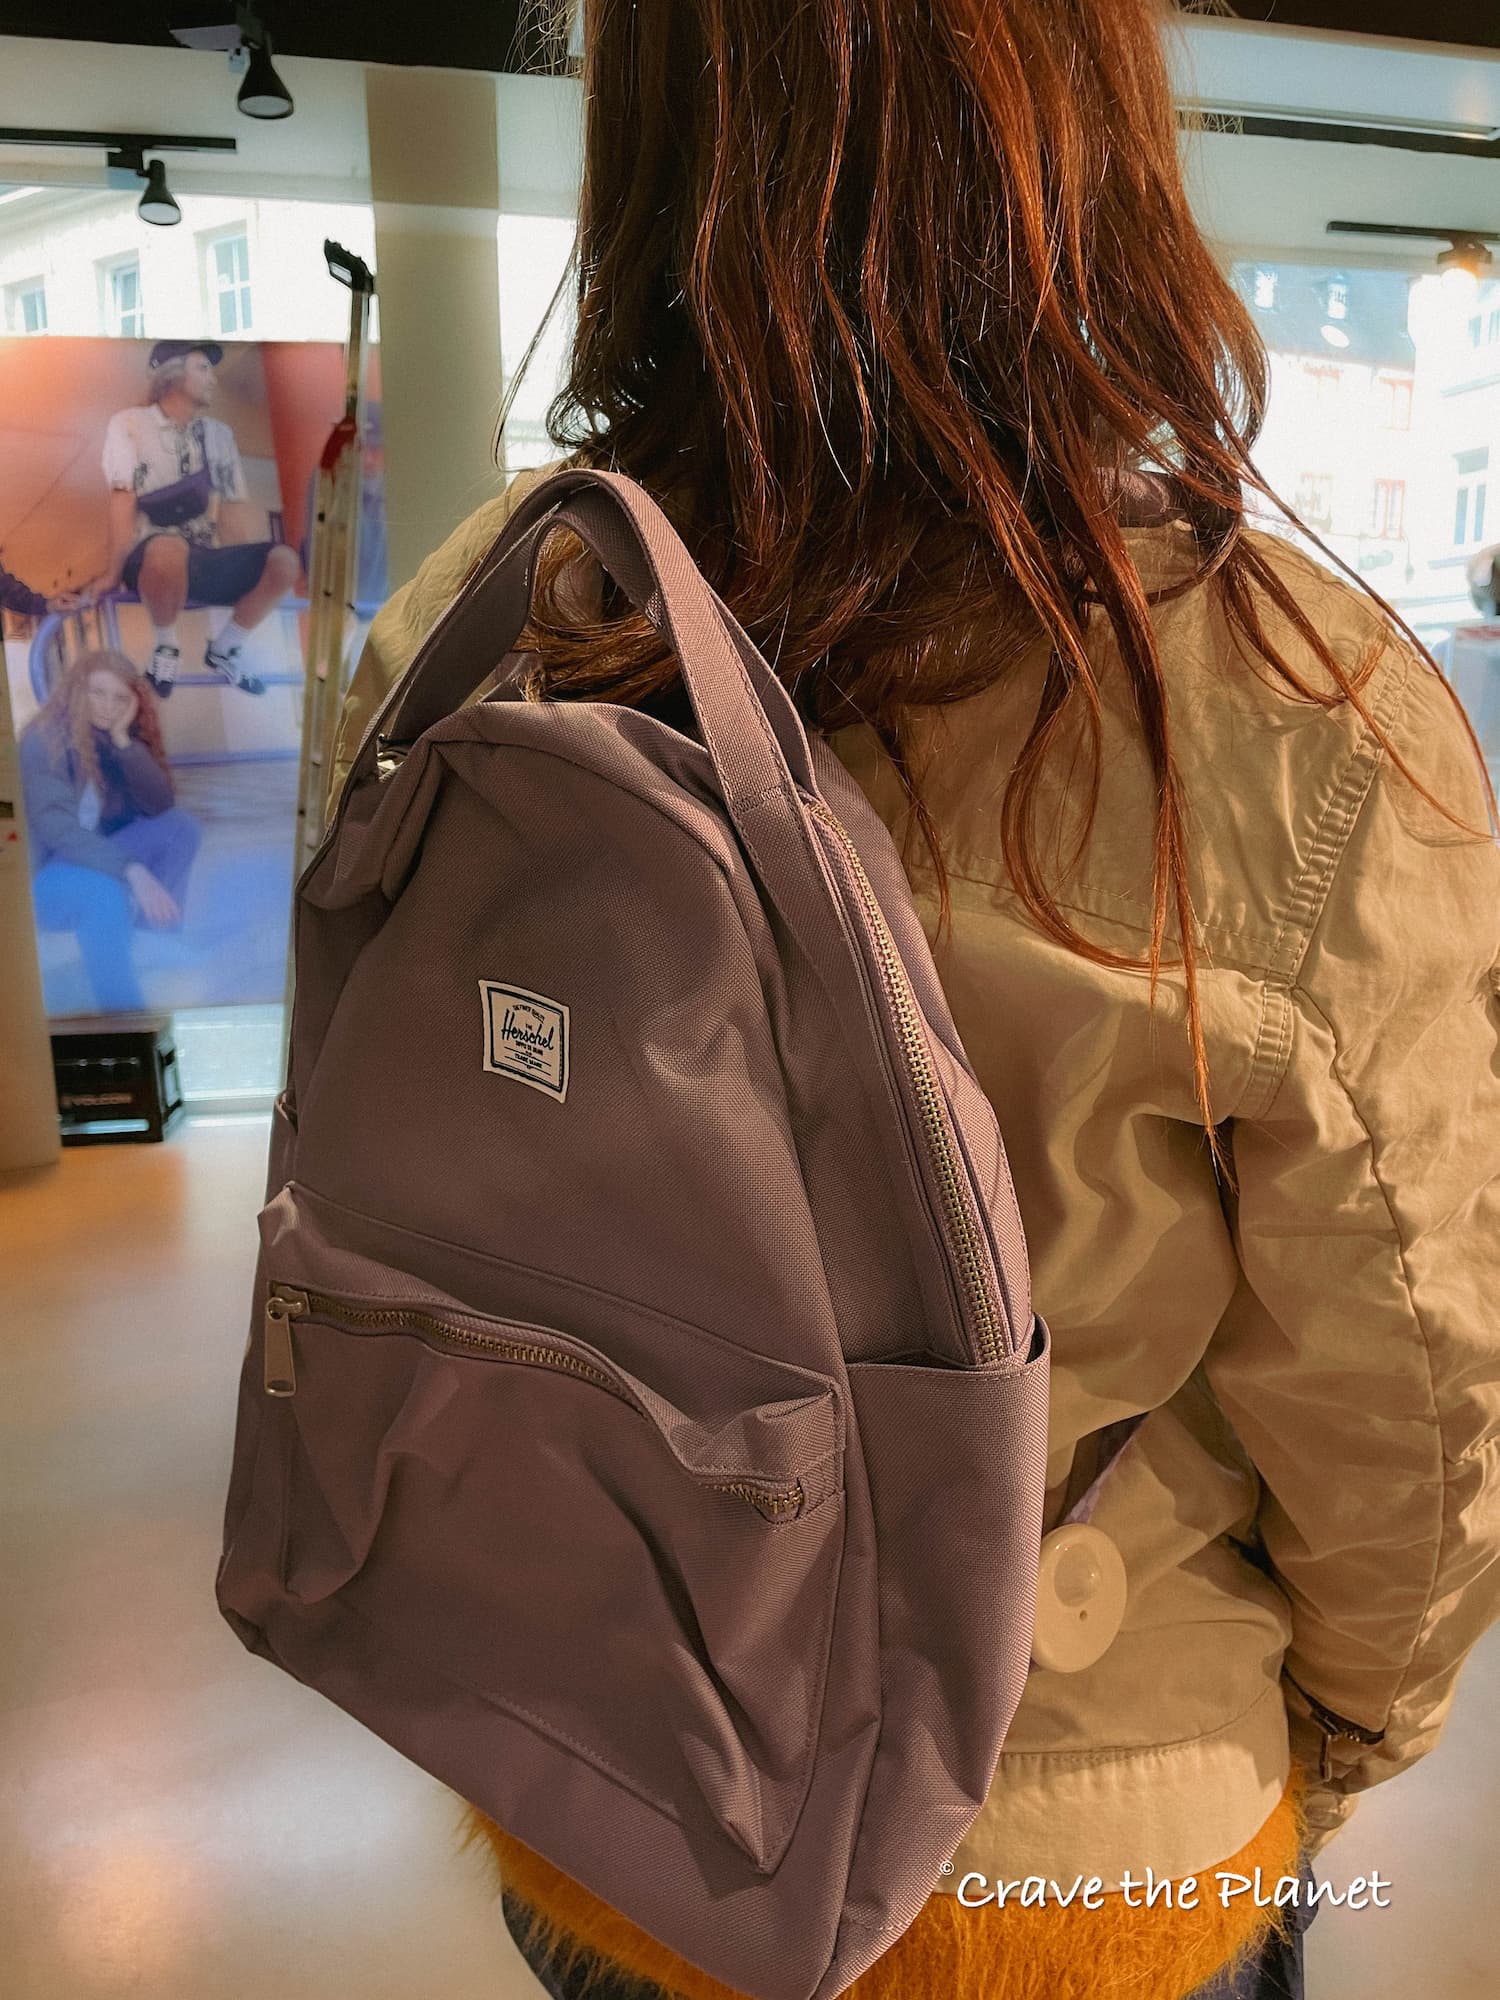 Can You Wash a Herschel Backpack?